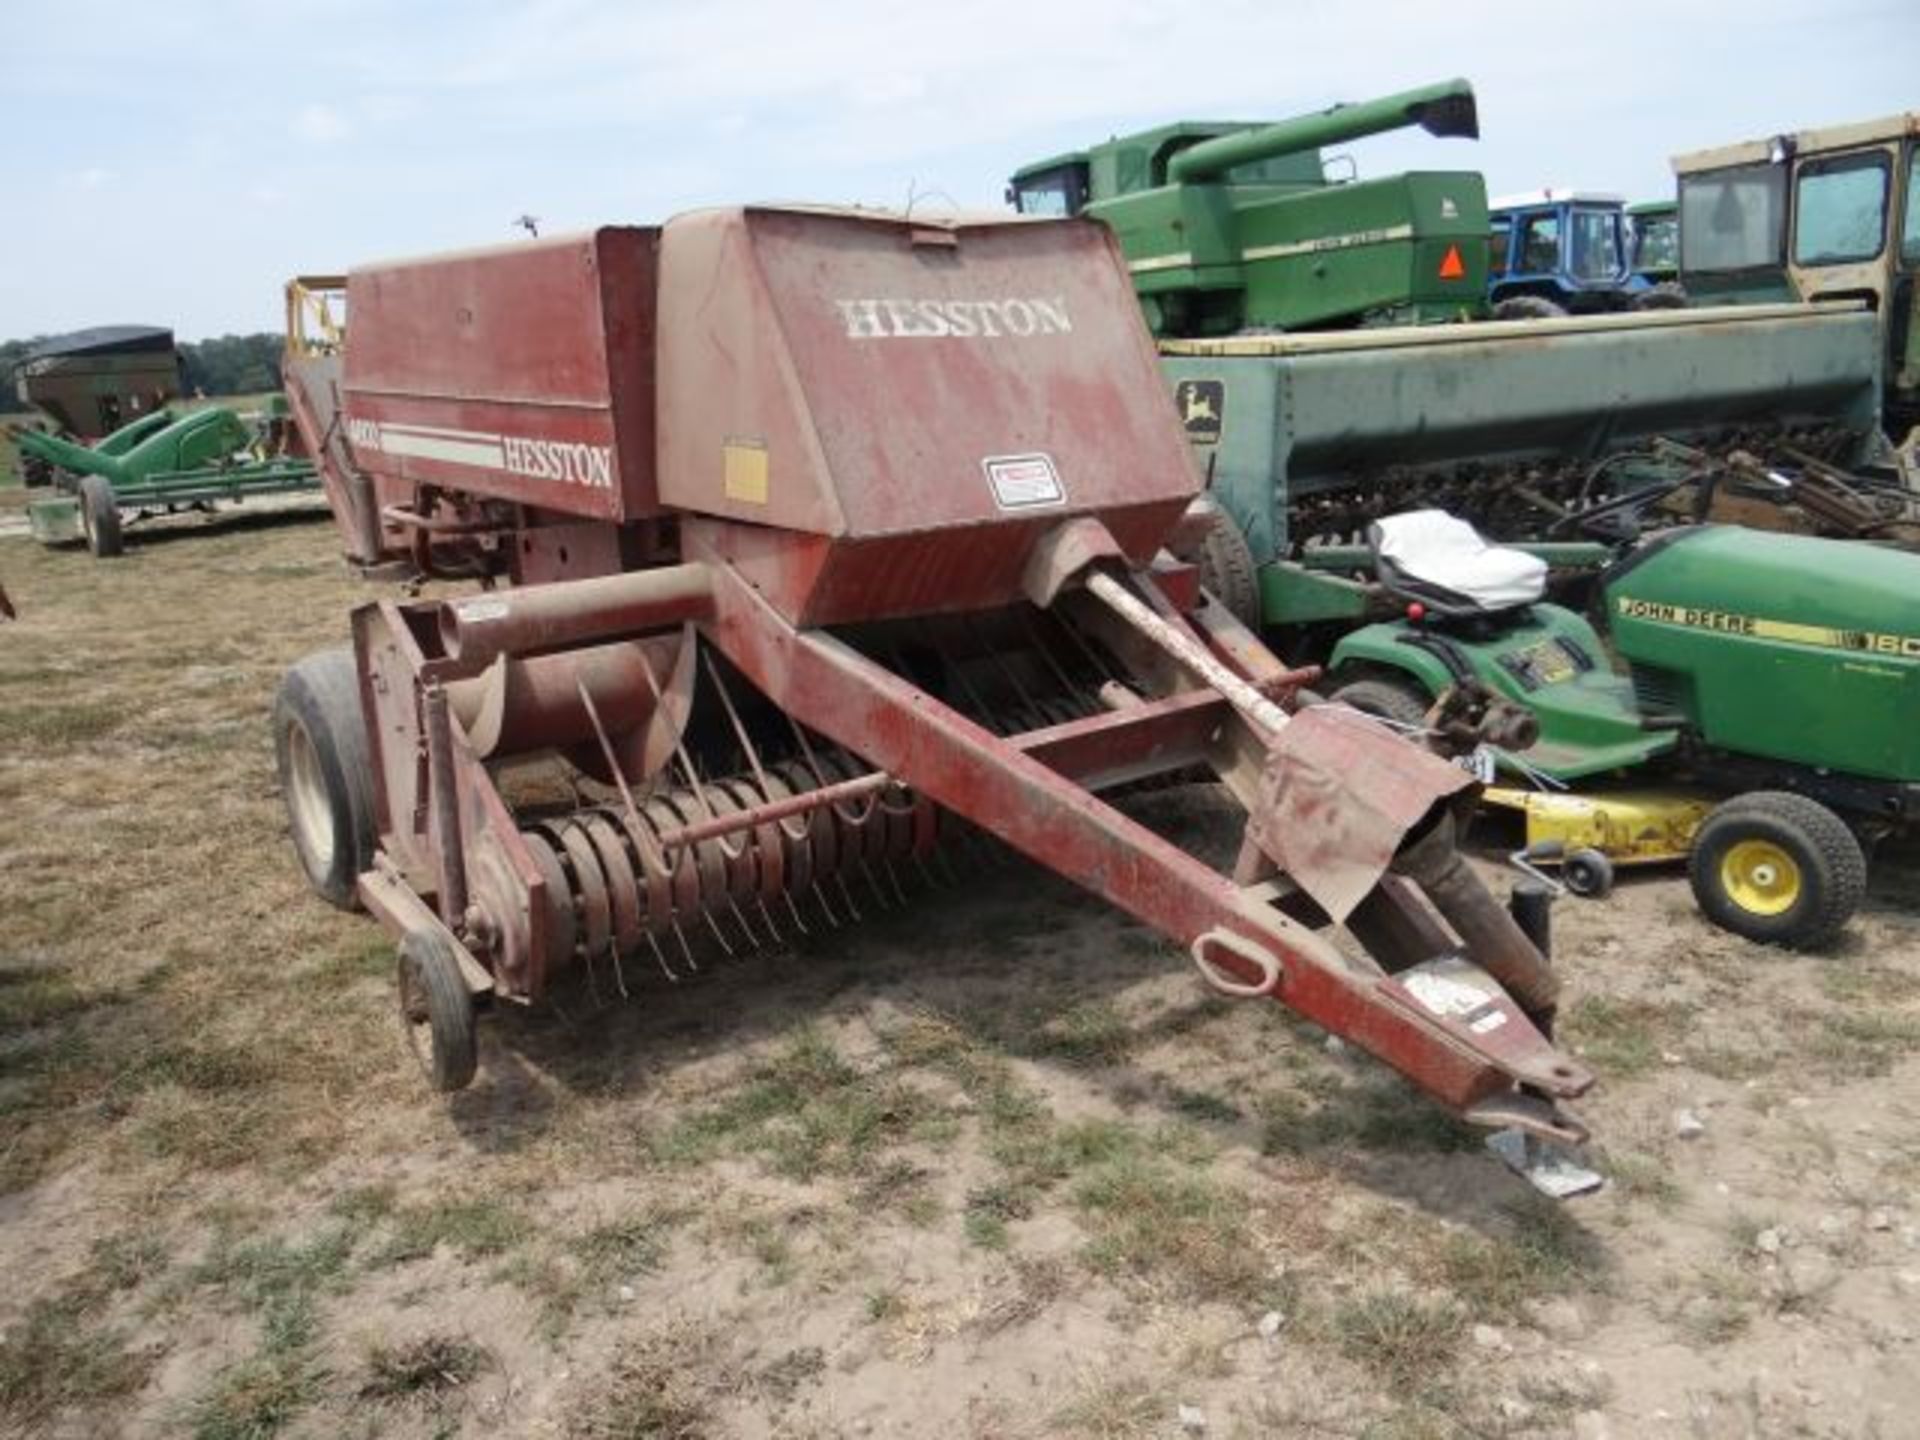 Hesston 4600 Inline Square Baler 540 PTO, Small Bales, Twine Tie, Manual in the Shed - Image 2 of 3